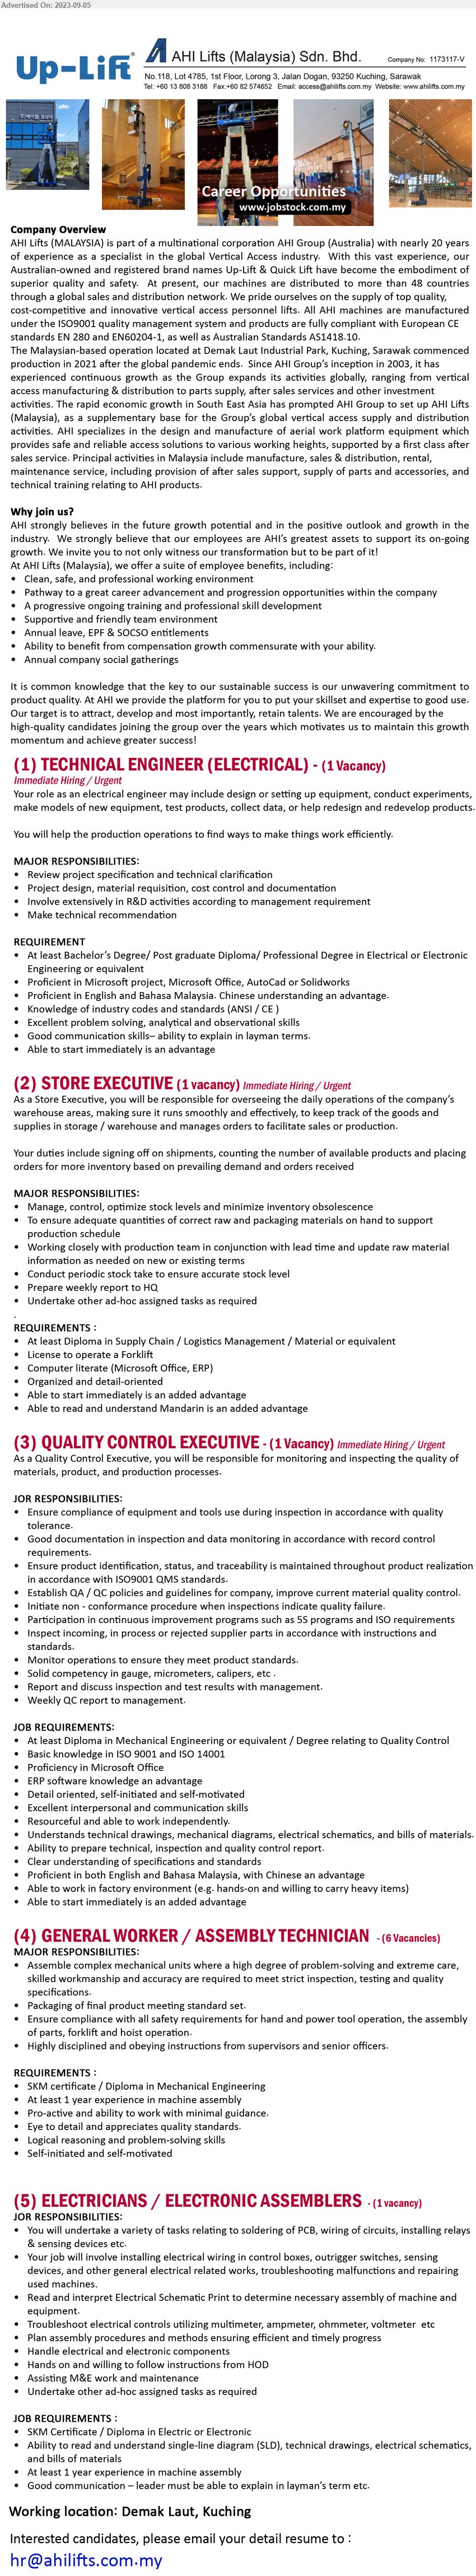 AHI LIFTS MALAYSIA SDN BHD - 1. TECHNICAL ENGINEER (ELECTRICAL) (Kuching), Bachelor’s Degree/ Post graduate Diploma/ Professional Degree in Electrical or Electronic  Engineering, ,...
2. STORE EXECUTIVE (Kuching), Diploma in Supply Chain / Logistics Management / Material, License to operate a Forklift ,...
3. QUALITY CONTROL EXECUTIVE (Kuching),  Diploma in Mechanical Engineering or equivalent / Degree relating to Quality Control , Basic knowledge in ISO 9001 and ISO 14001,...
4. GENERAL WORKER / ASSEMBLY TECHNICIAN (Kuching), SKM certificate / Diploma in Mechanical Engineering, 	At least 1 year experience in machine assembly,...
5. ELECTRICIANS / ELECTRONIC ASSEMBLERS (Kuching), SKM Certificate / Diploma in Electric or Electronic, At least 1 year experience in machine assembly,...
Email resume to ....